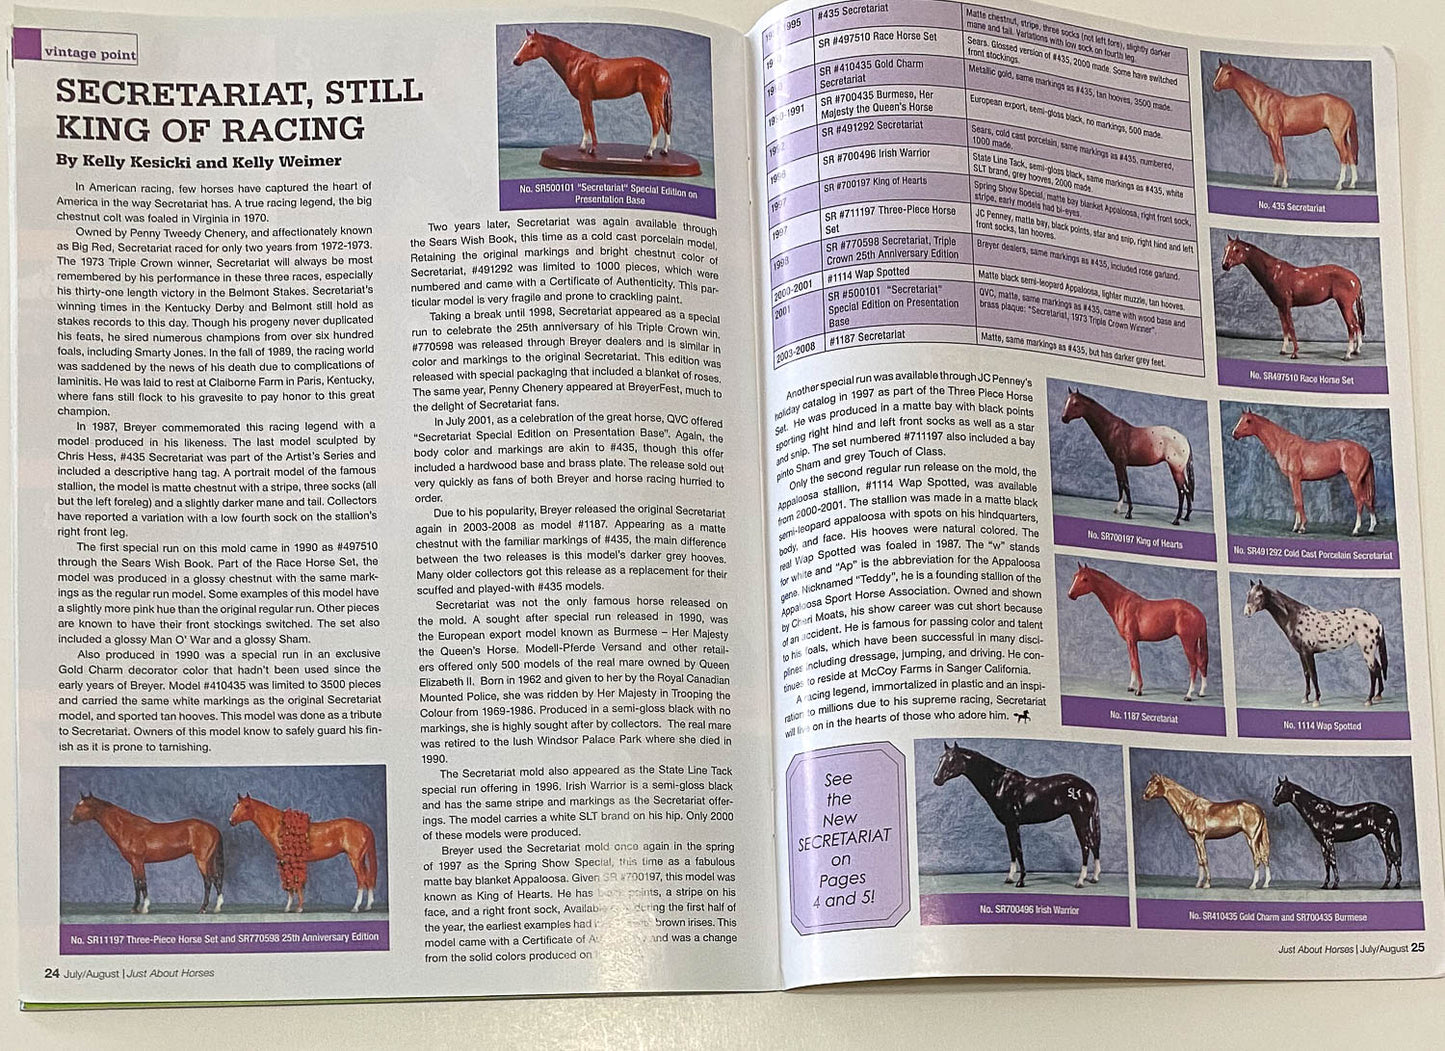 Just About Horses Magazine Vol. 36, No. 4, 2009 July/Aug